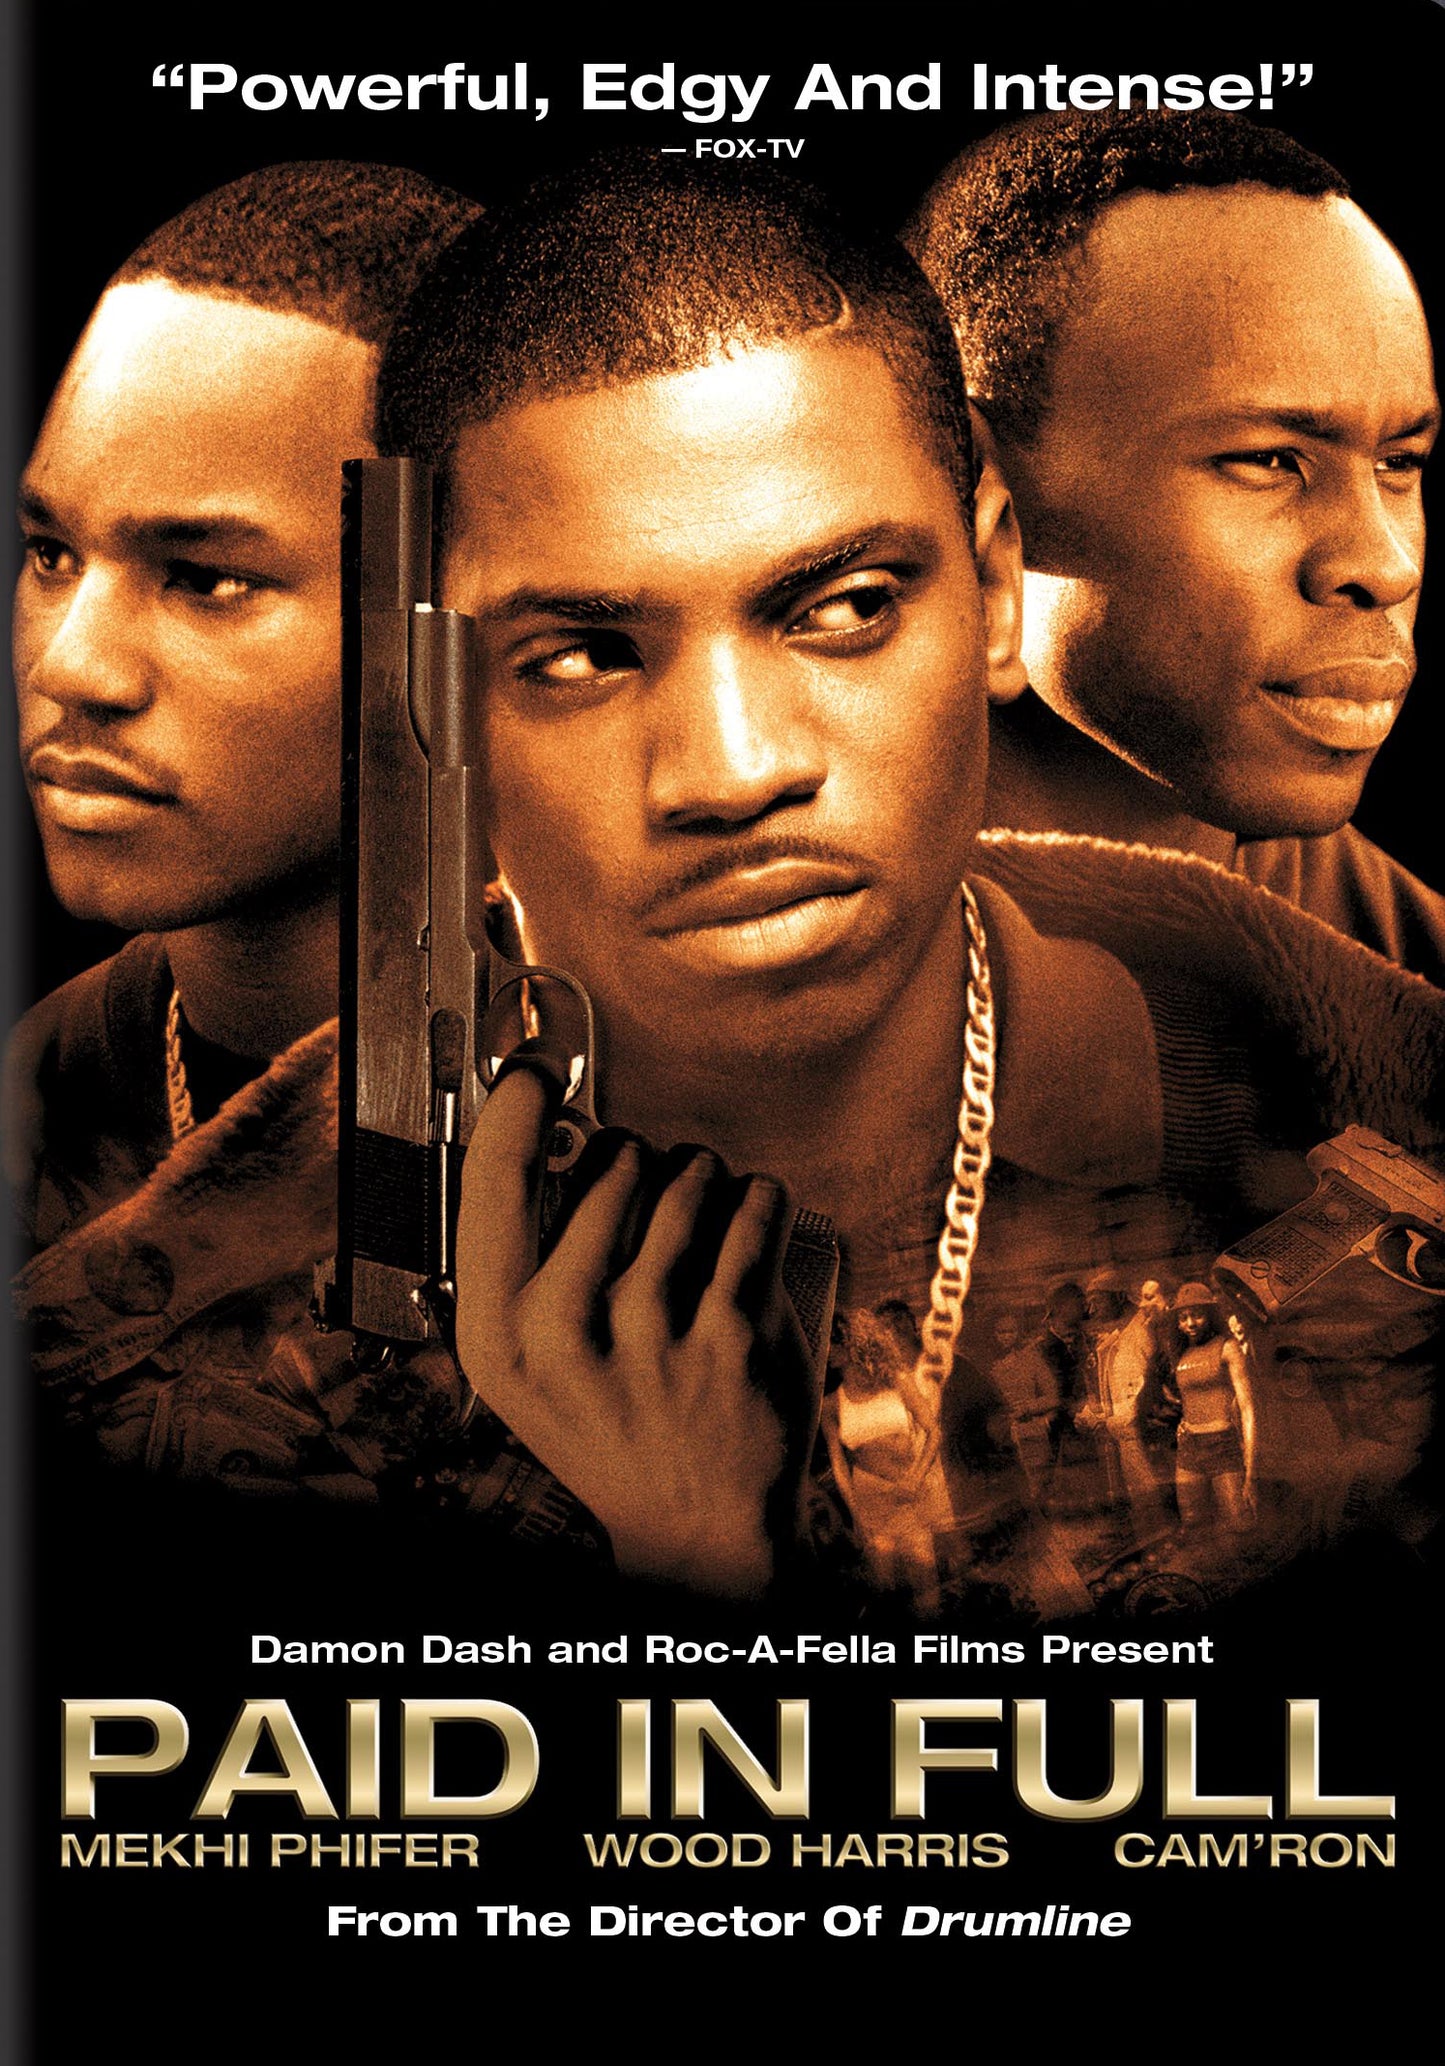 Paid in Full cover art